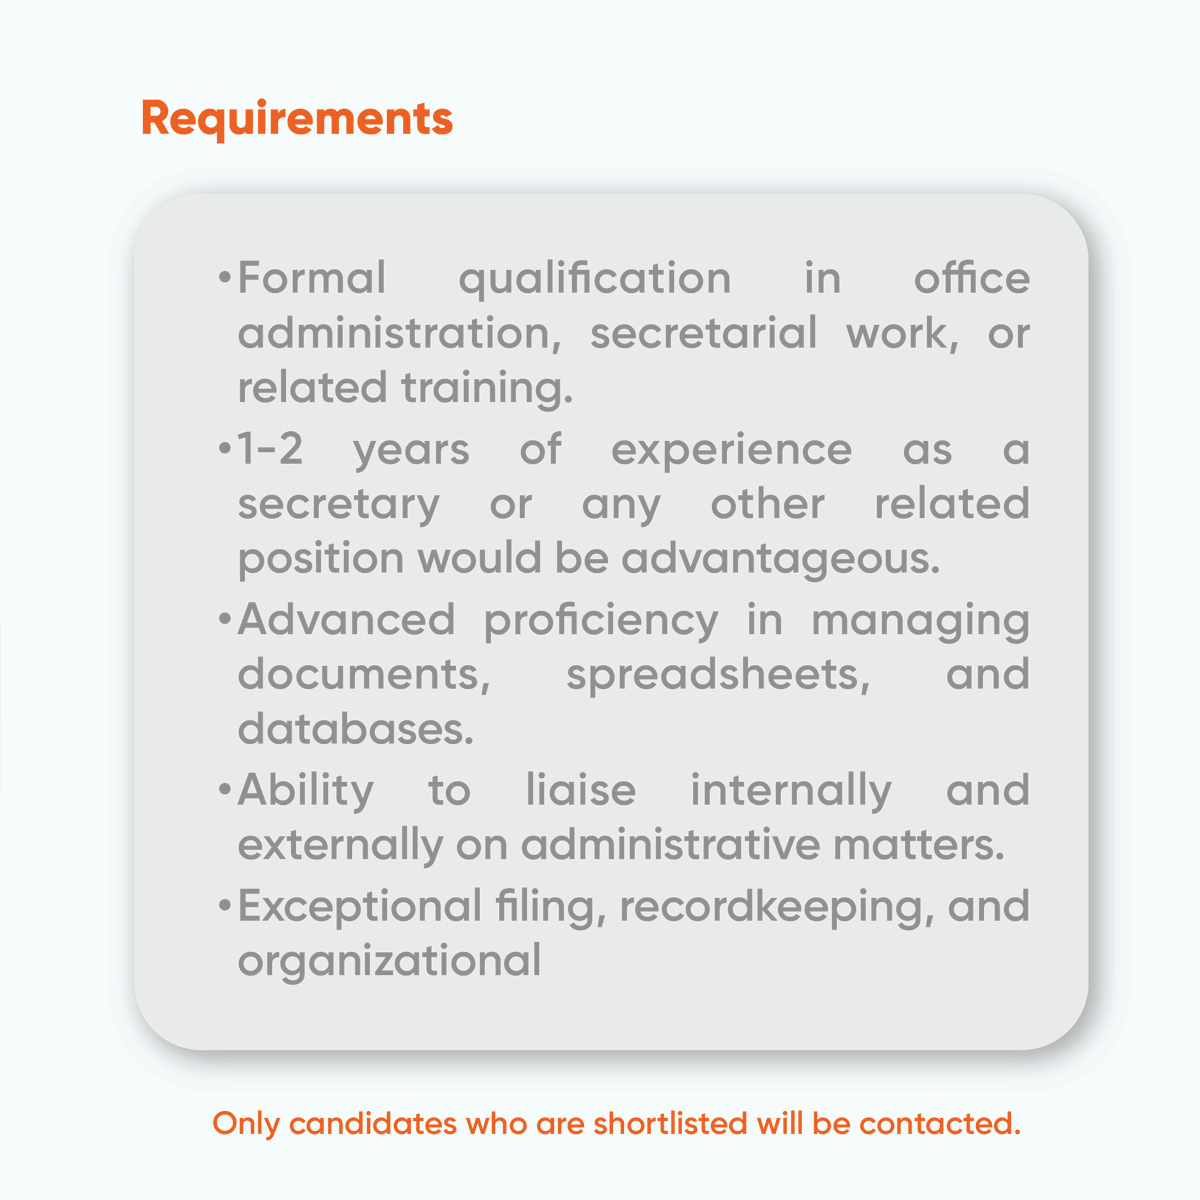 To be considered for the job, please apply by sending your application to jobs@shugulika.com.

Please note that only candidates who are shortlisted will be contacted. 

#Secretary #AdministrativeJobs #ExecutiveAssistant #AdministrativeAssistant #SecretaryRole #JobOpening